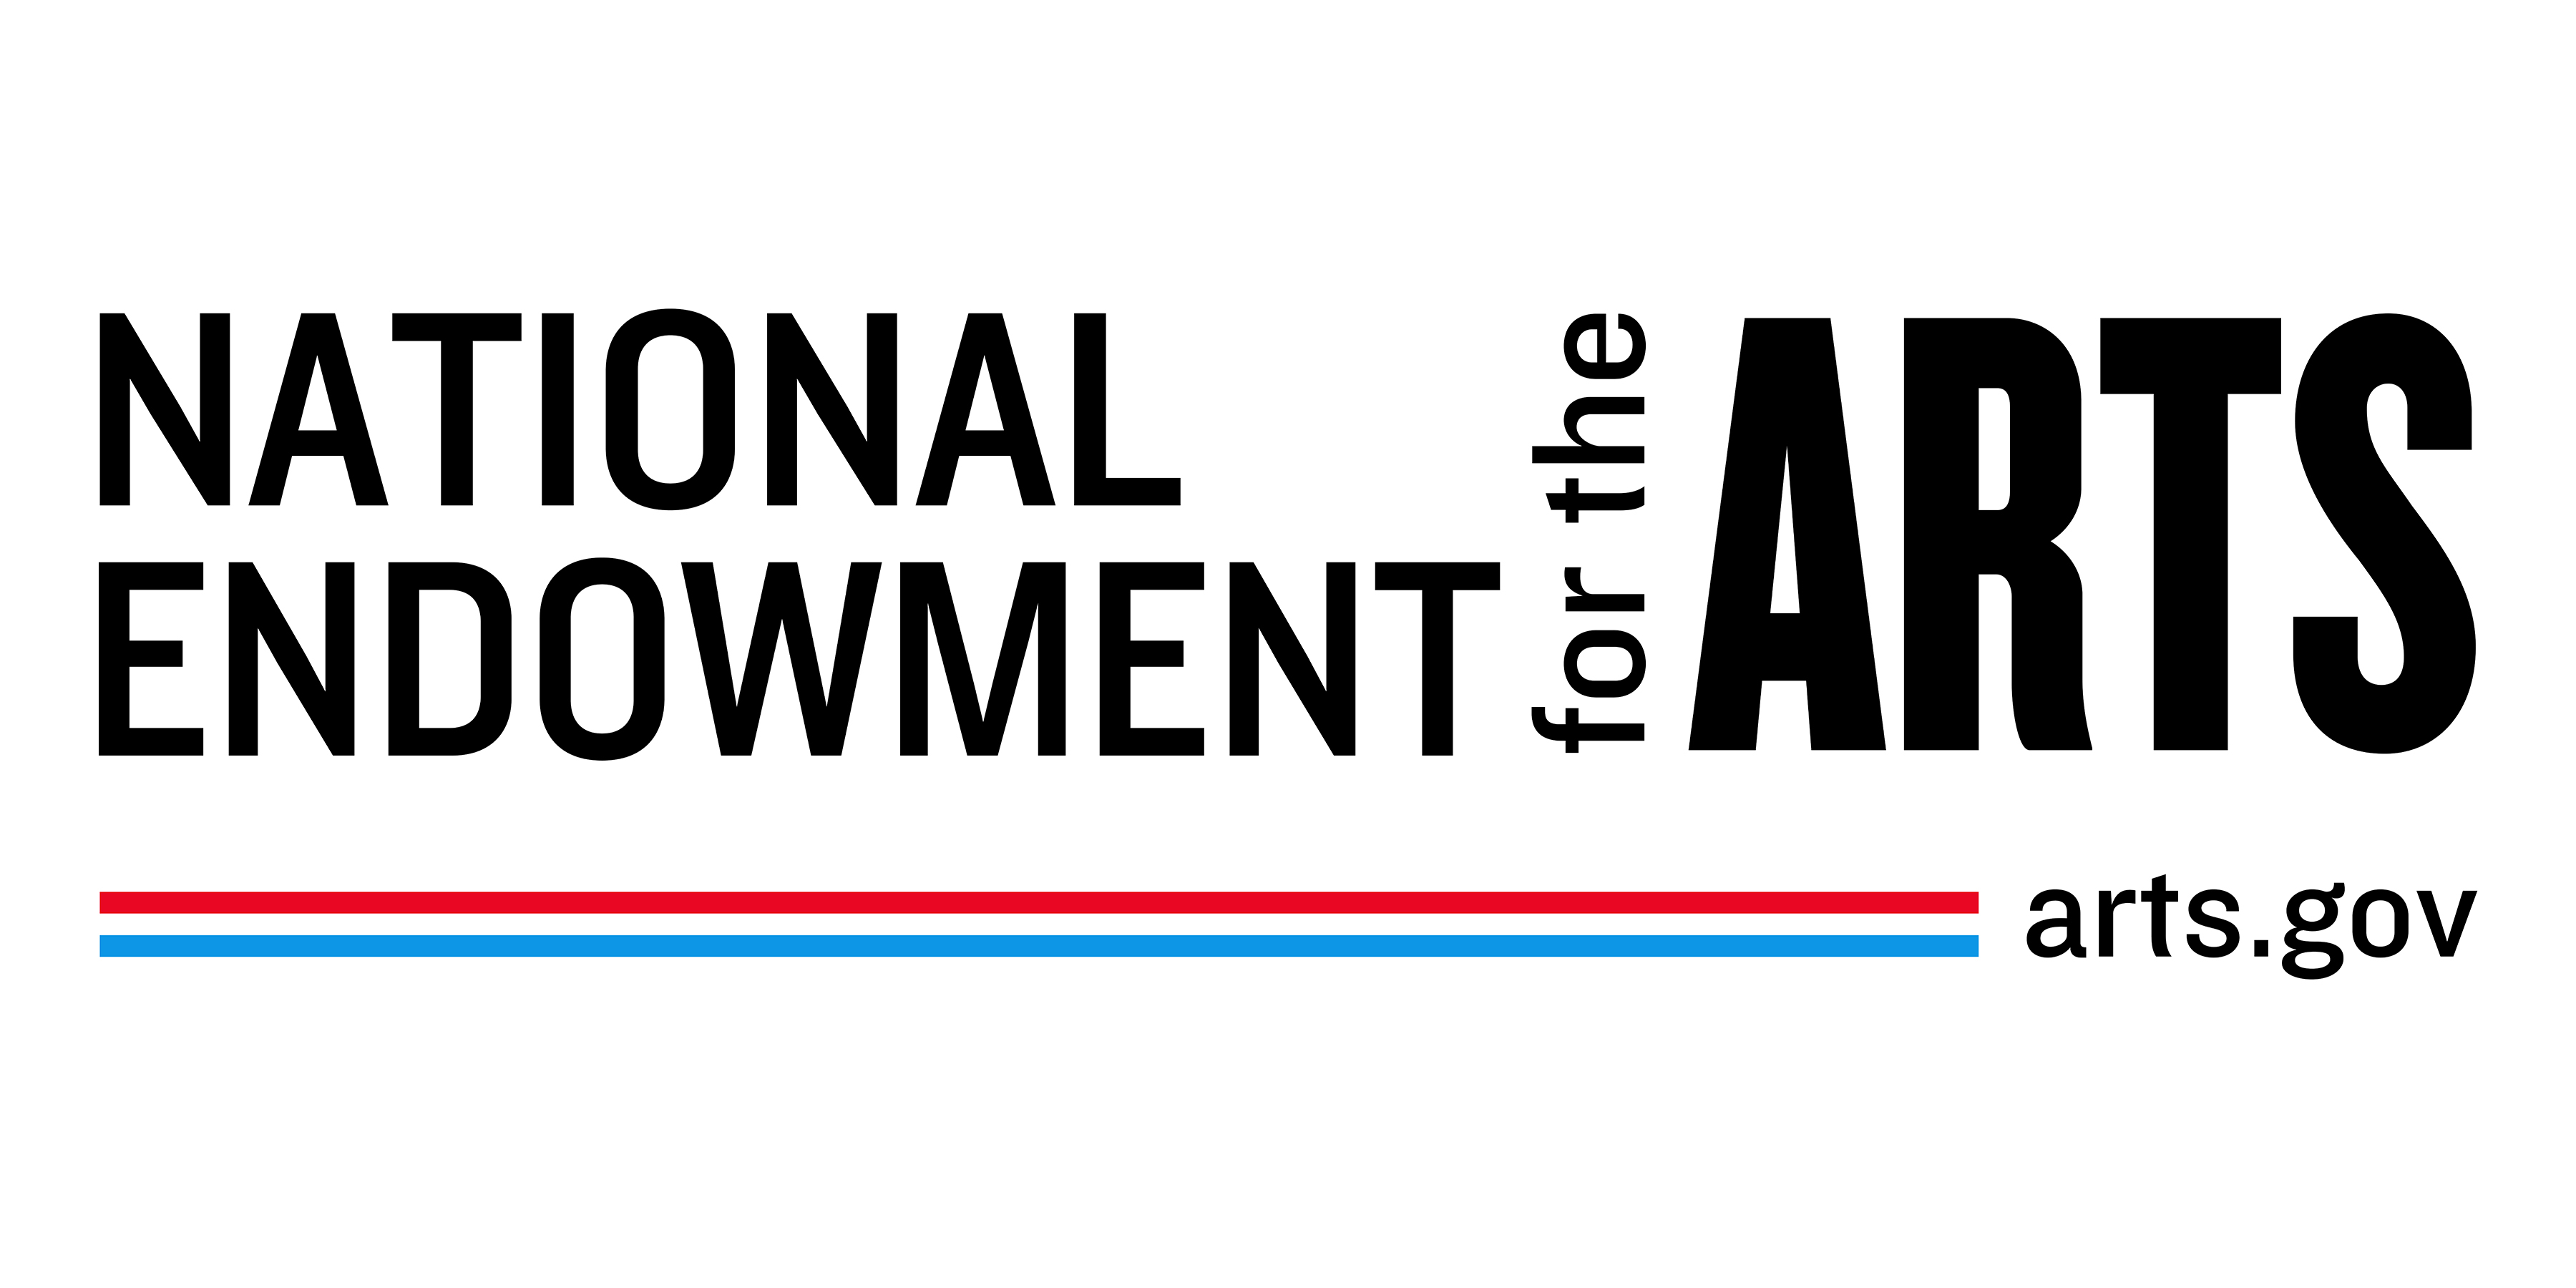 National Endowment for the Arts. arts.gov.